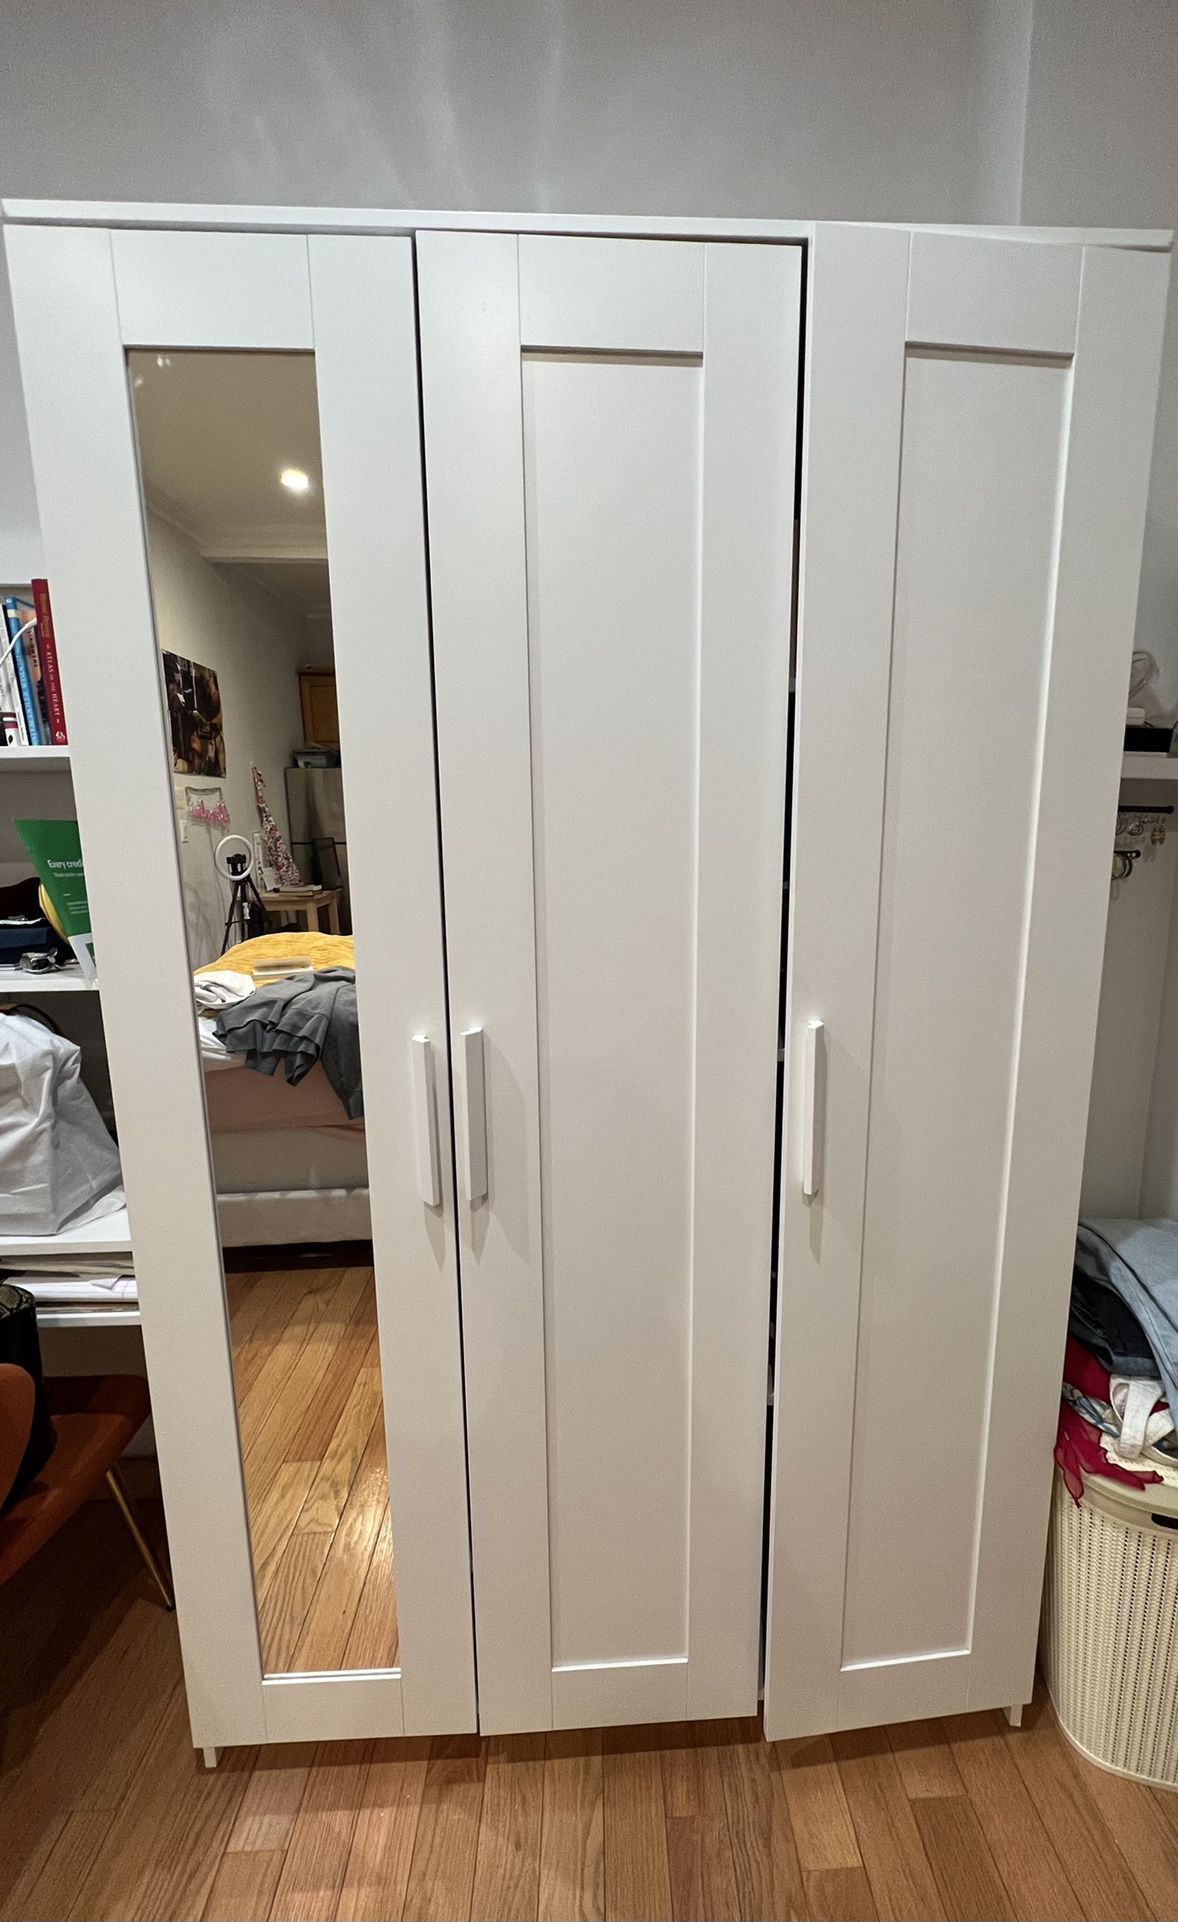 Large Armoire Closet With Hanger Rack Shelf And Shoe Rack